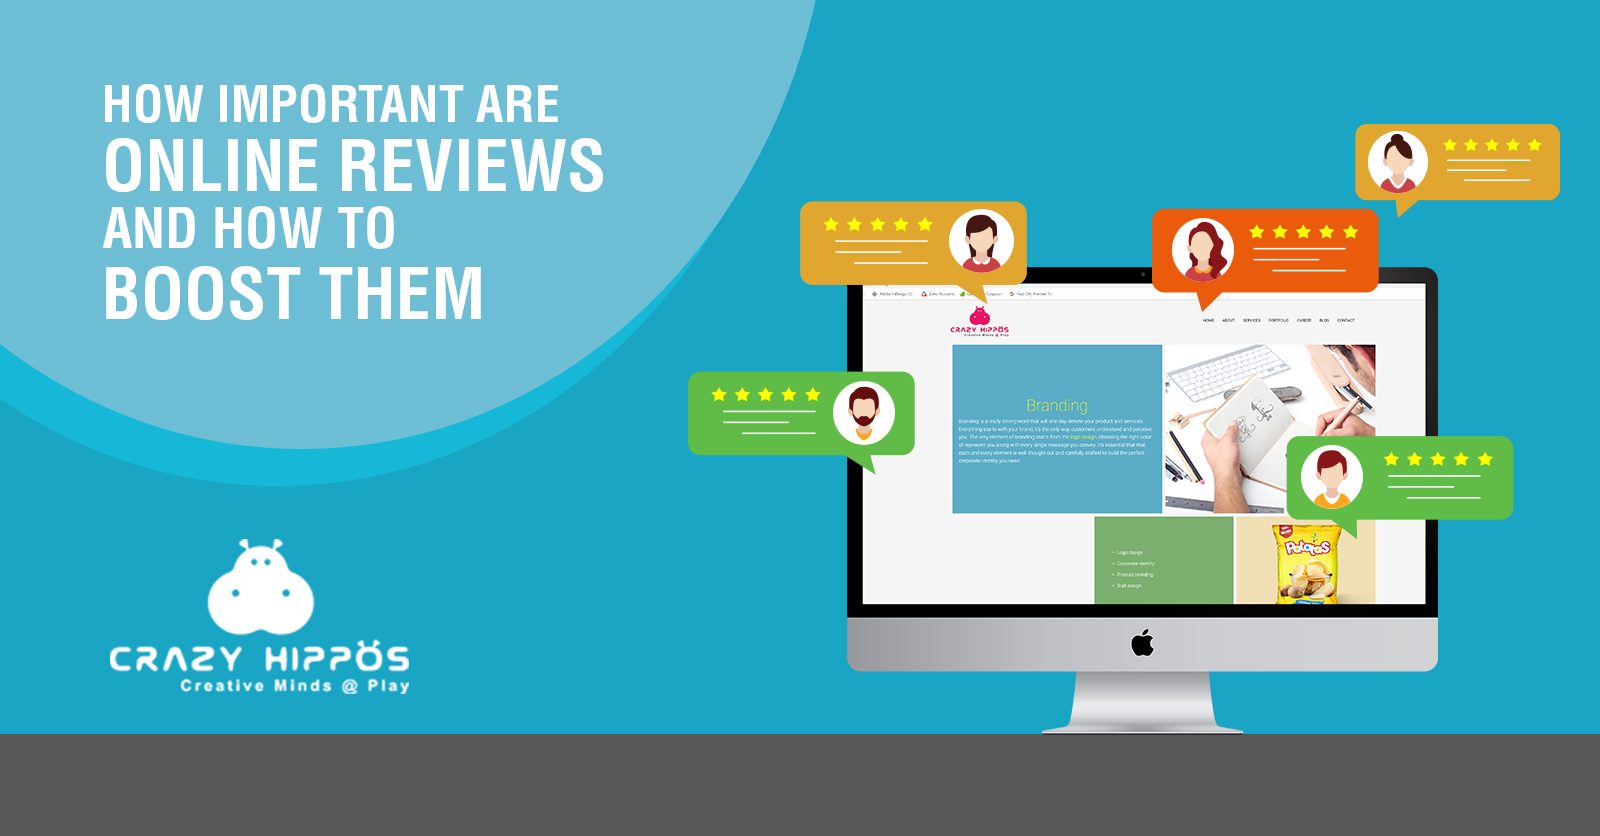 HOW IMPORTANT ARE ONLINE REVIEWS AND HOW TO BOOST THEM?